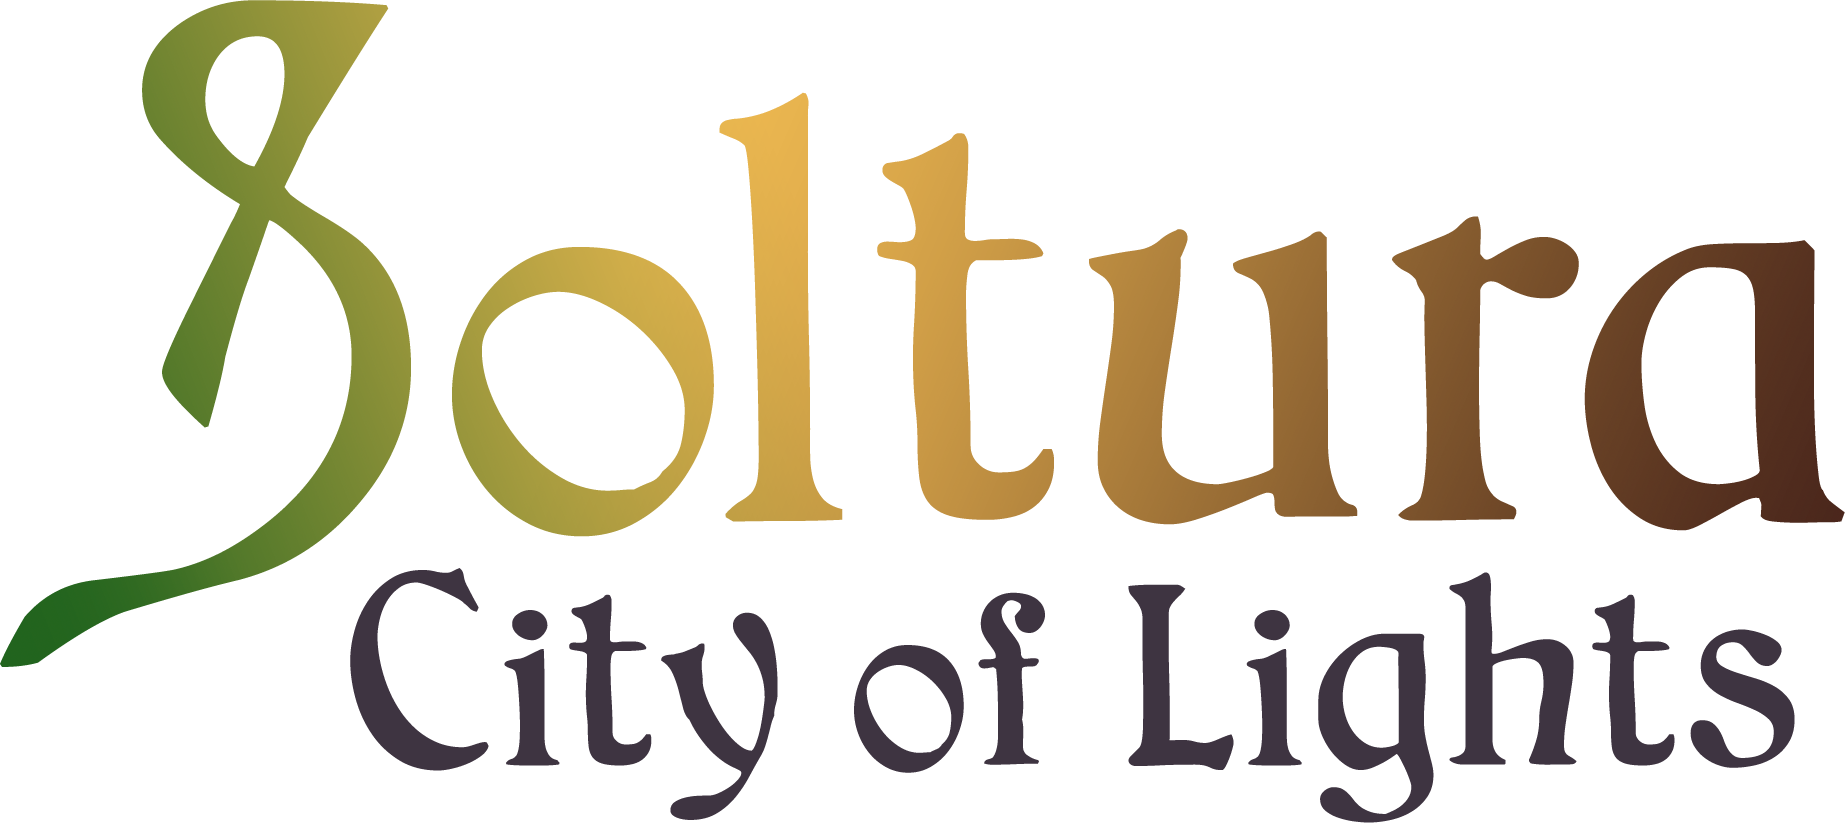 Art Nouveau inspired title in green, gold, and purple. Soltura, City of Lights.